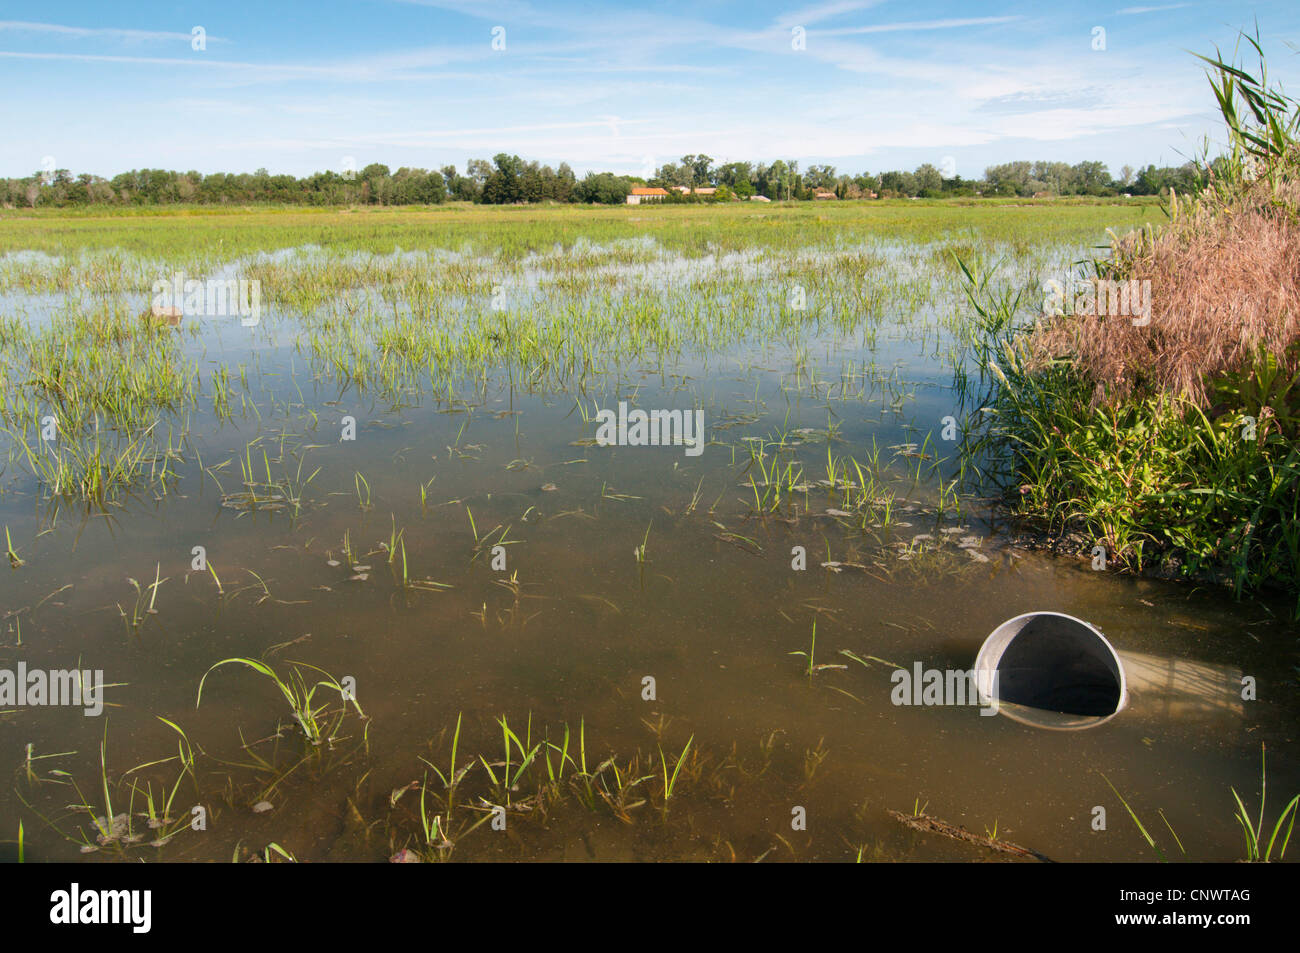 rice cultivation in the Camargue, France, Bouches-du-Rhne, Provence-Alpes-Cote d'Azur, Camargue Stock Photo